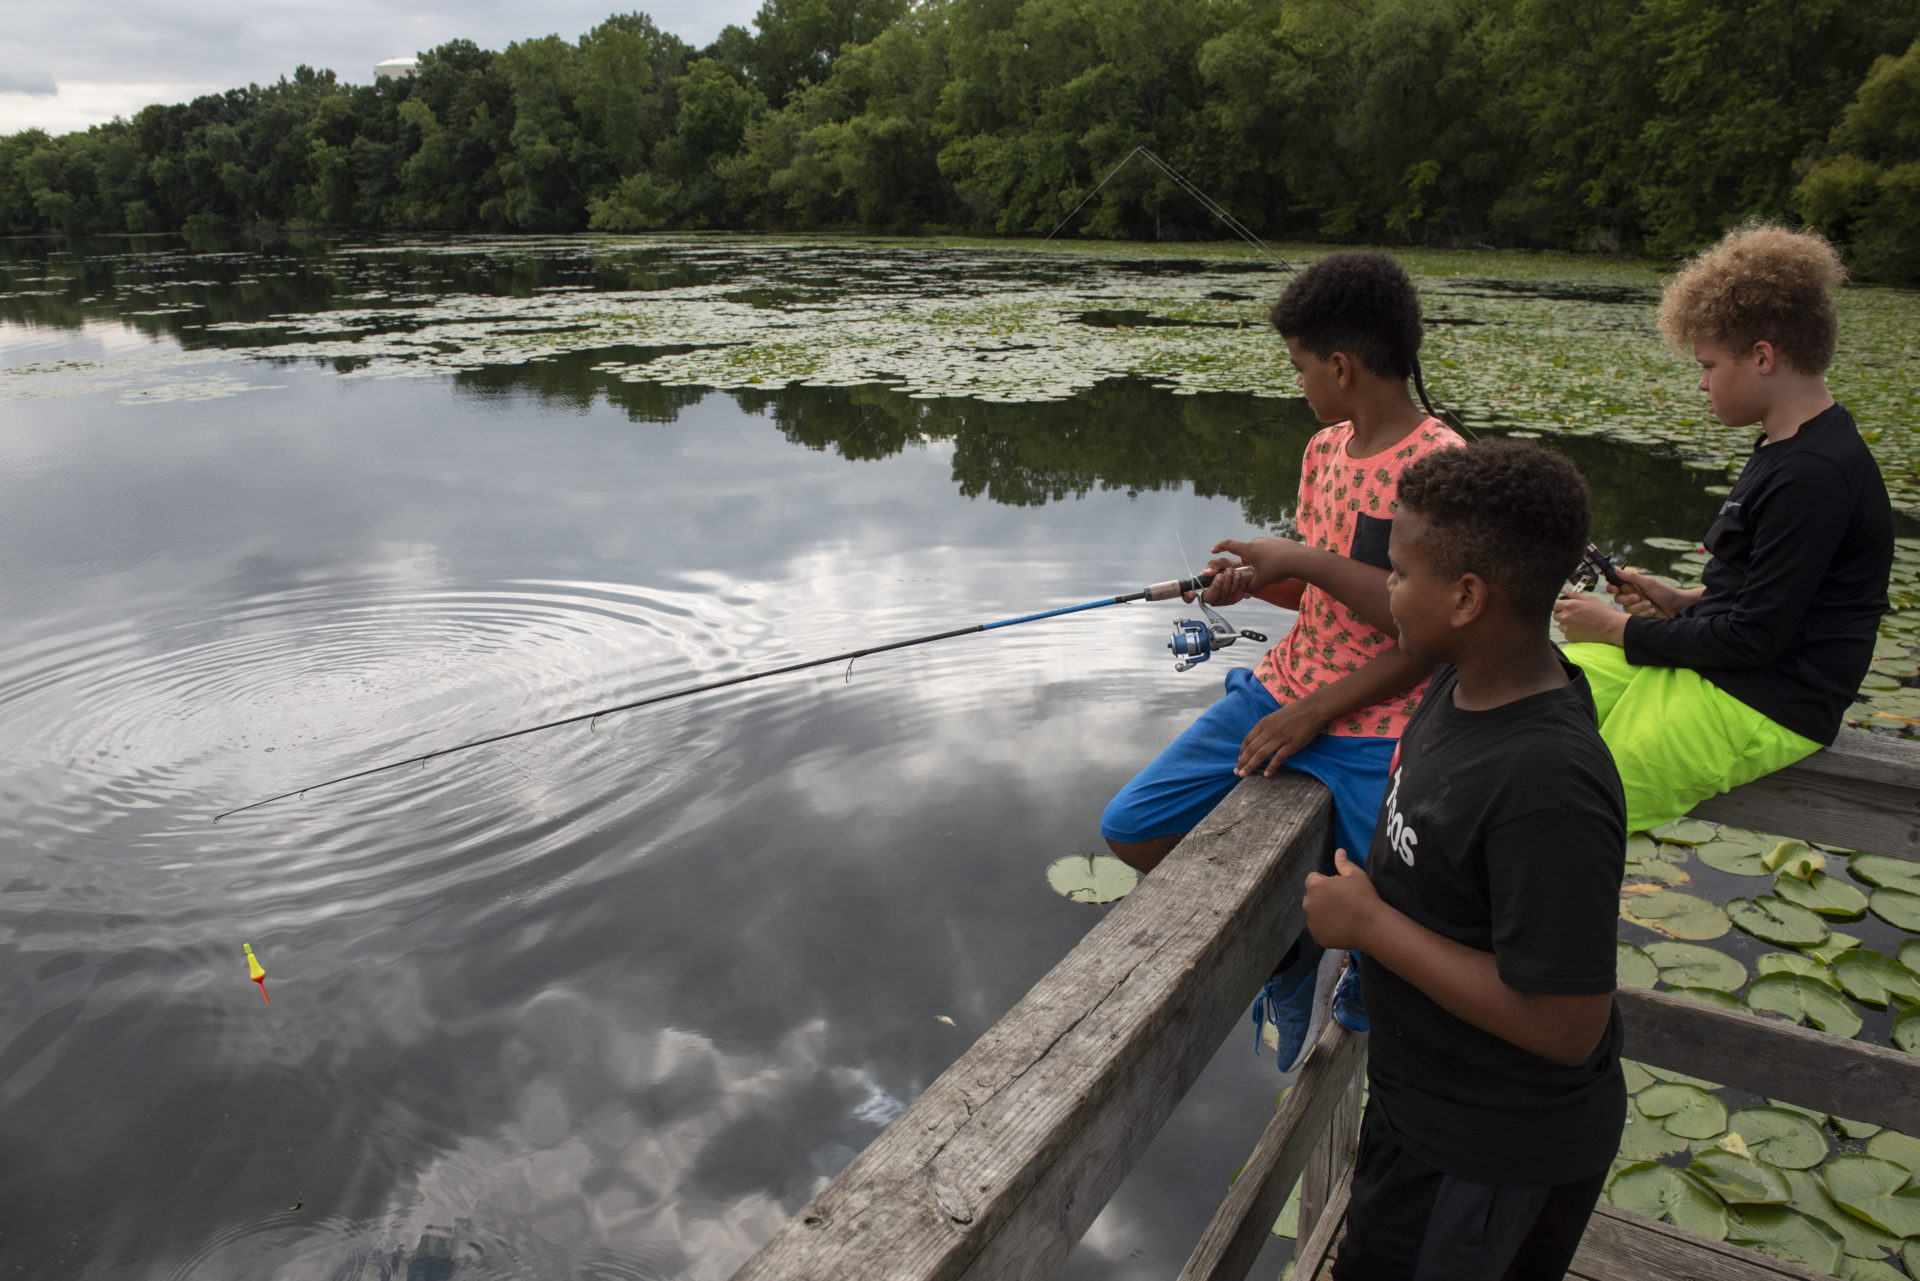 A group of three kids fishing off a dock